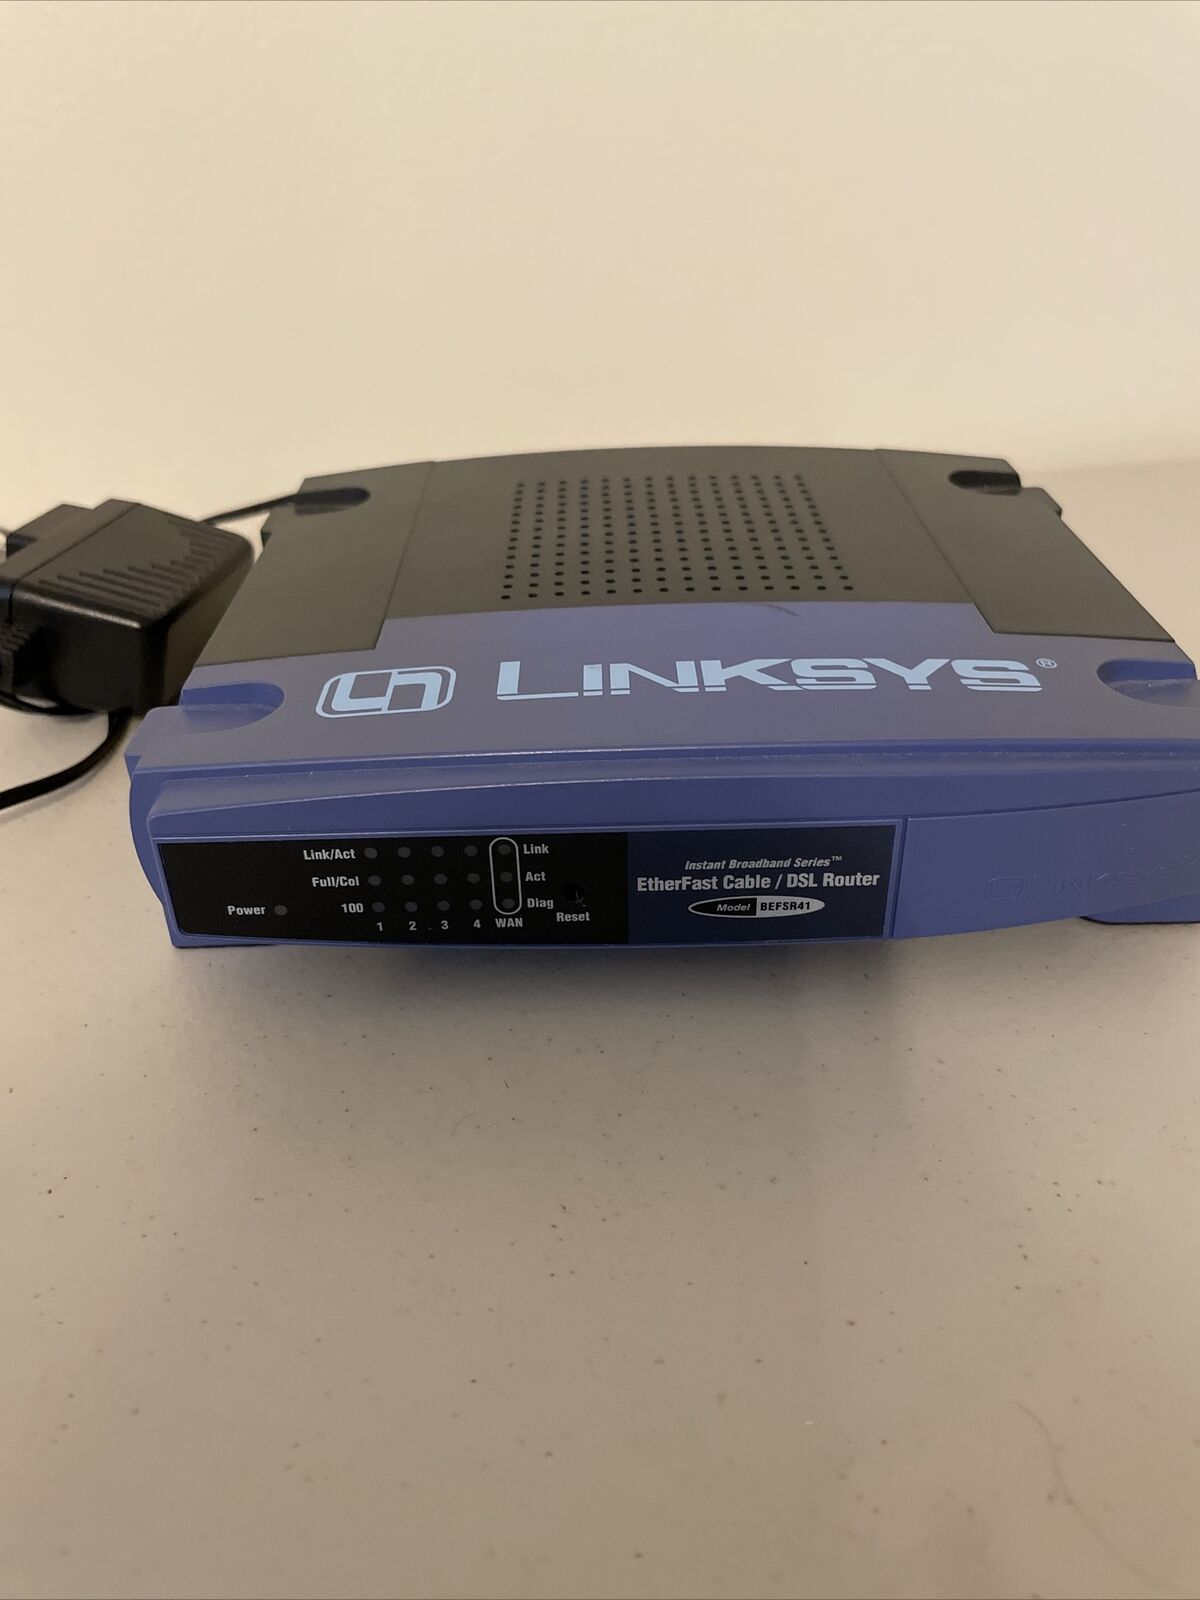 Cisco Linksys EtherFast Cable/DSL Router 4-Port Switch BEFSR41